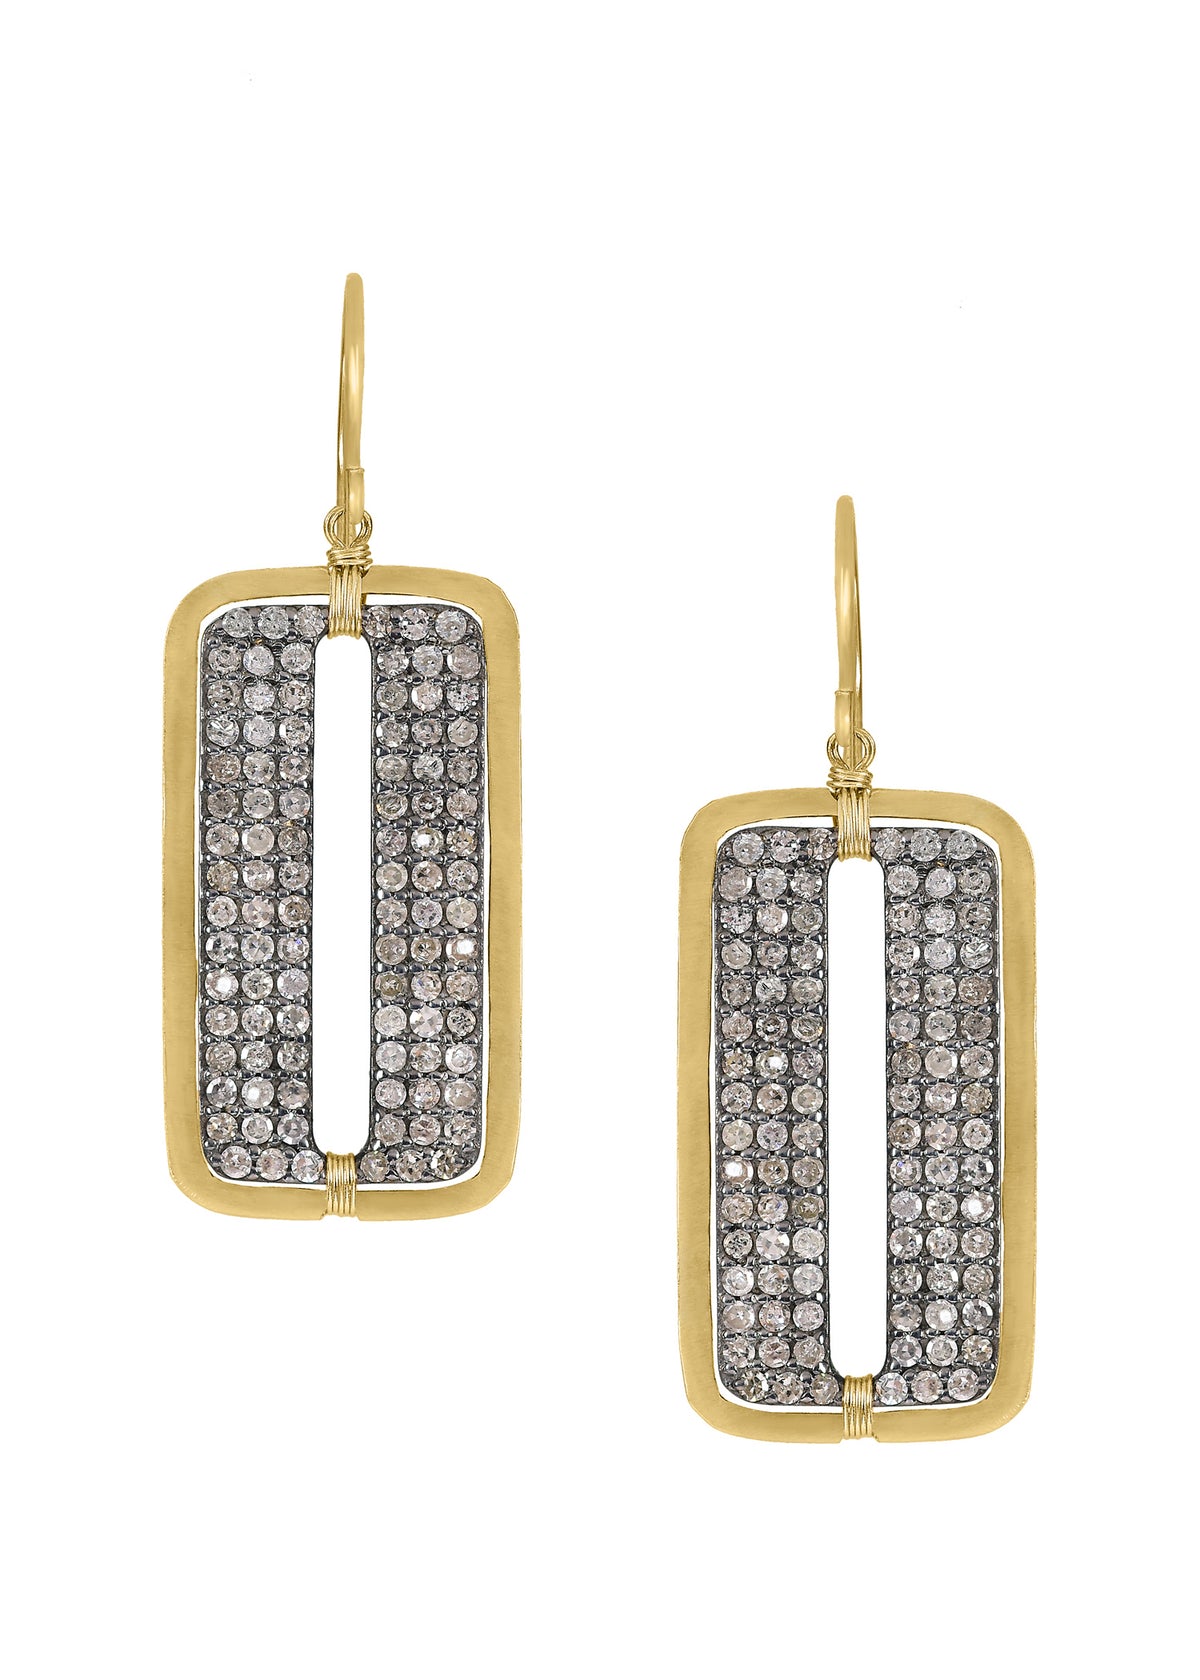 Diamond 14k gold Sterling silver Mixed metal Special order only Earrings measure 1-5/8&quot; in length (including the ear wires) and 5/8&quot; in width Handmade in our Los Angeles studio